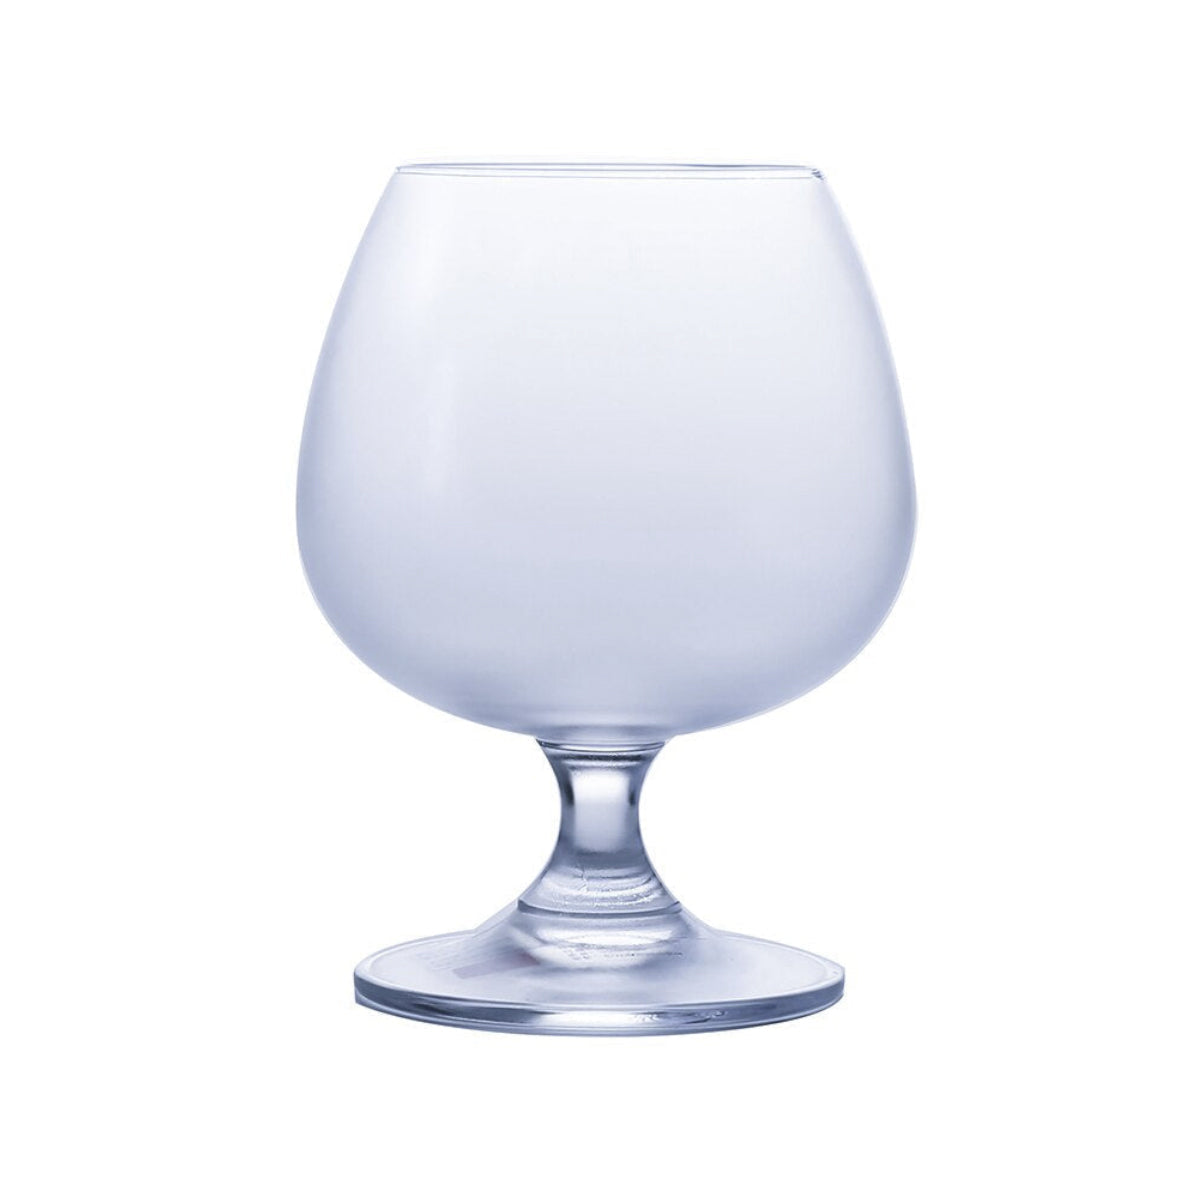 Classic Brandy Glass For Whiskey and Cocktails